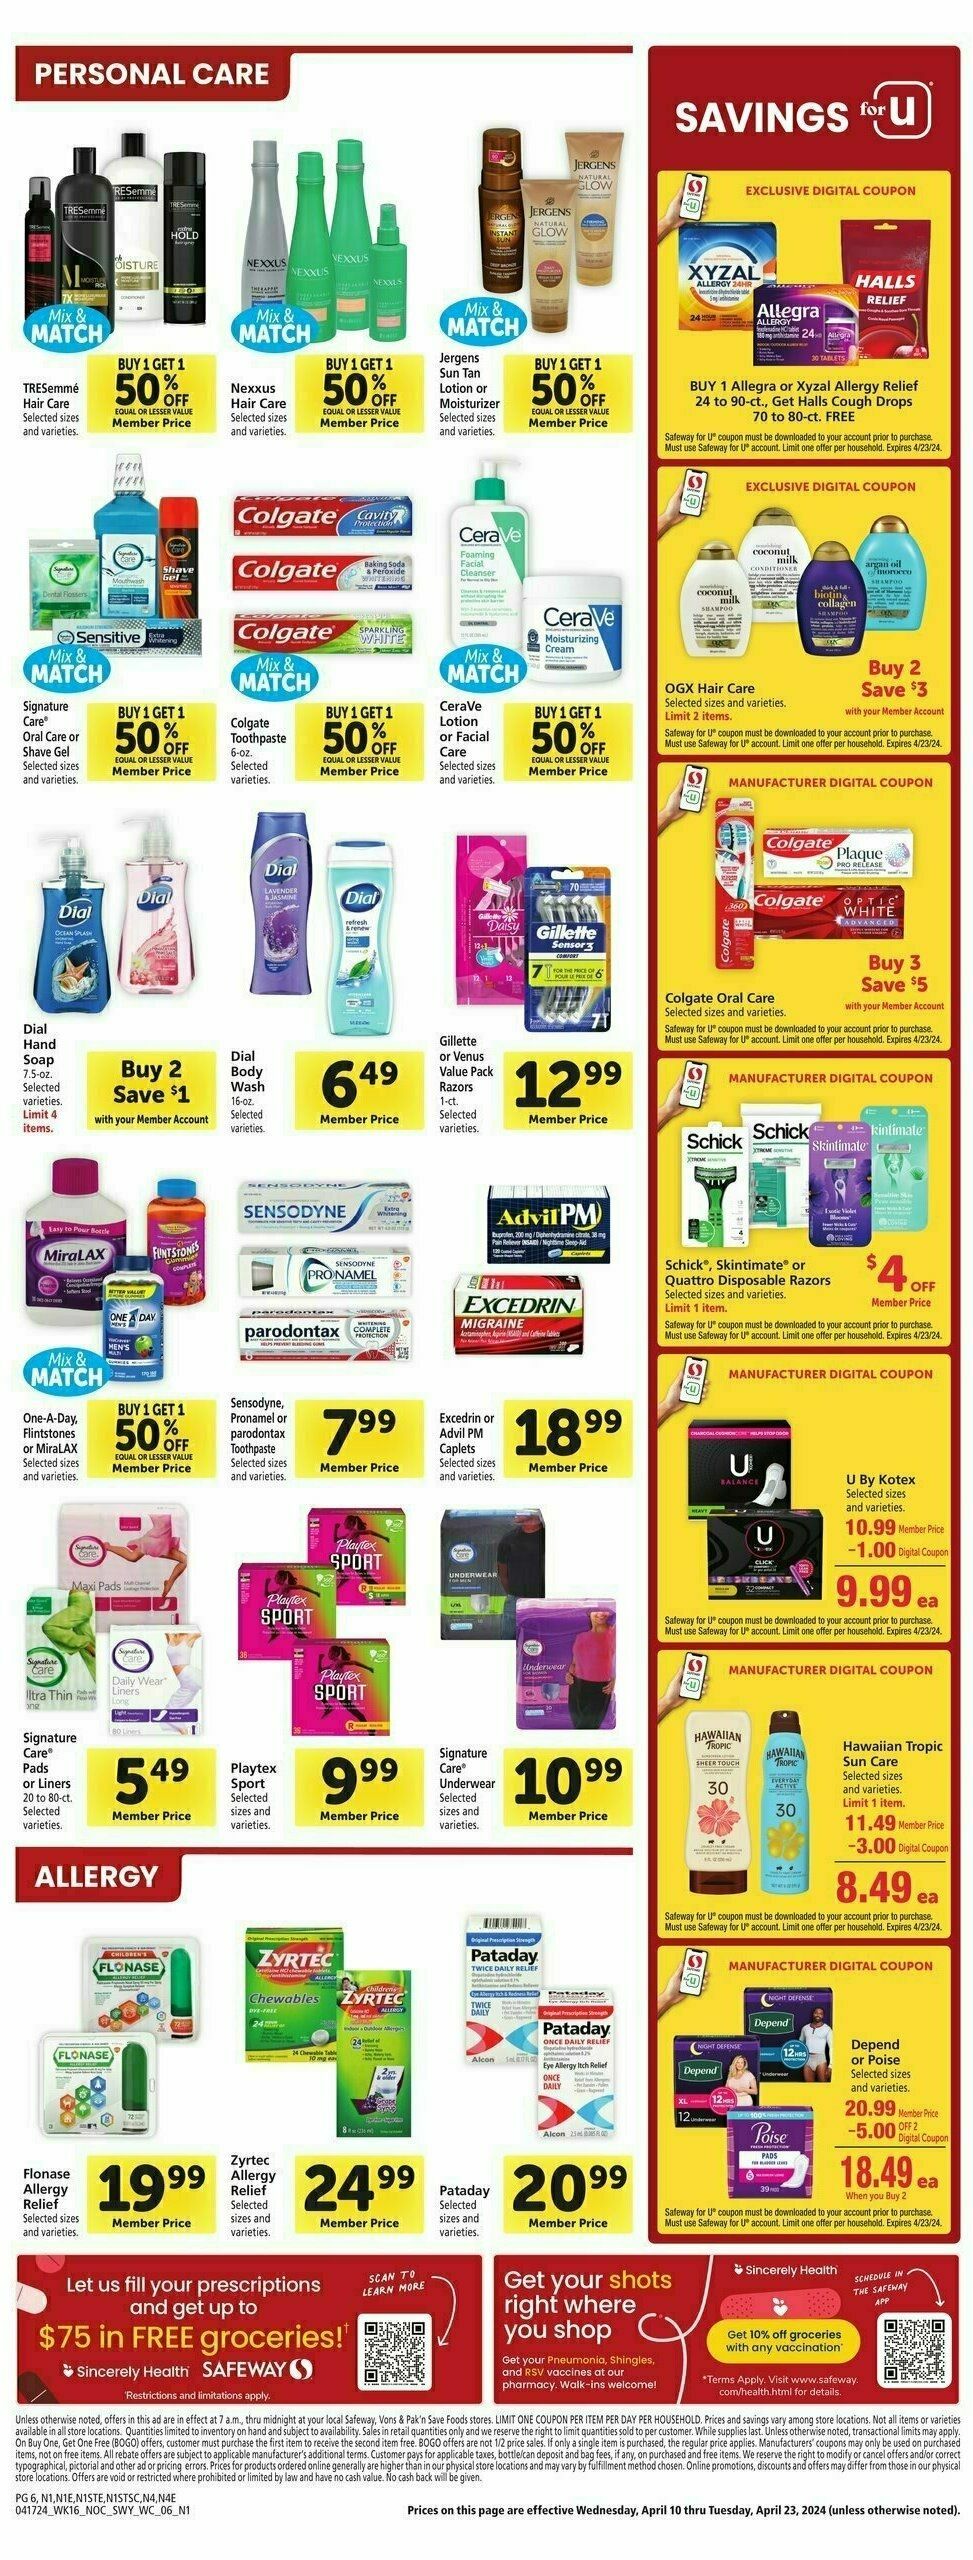 Safeway Weekly Ad from April 17